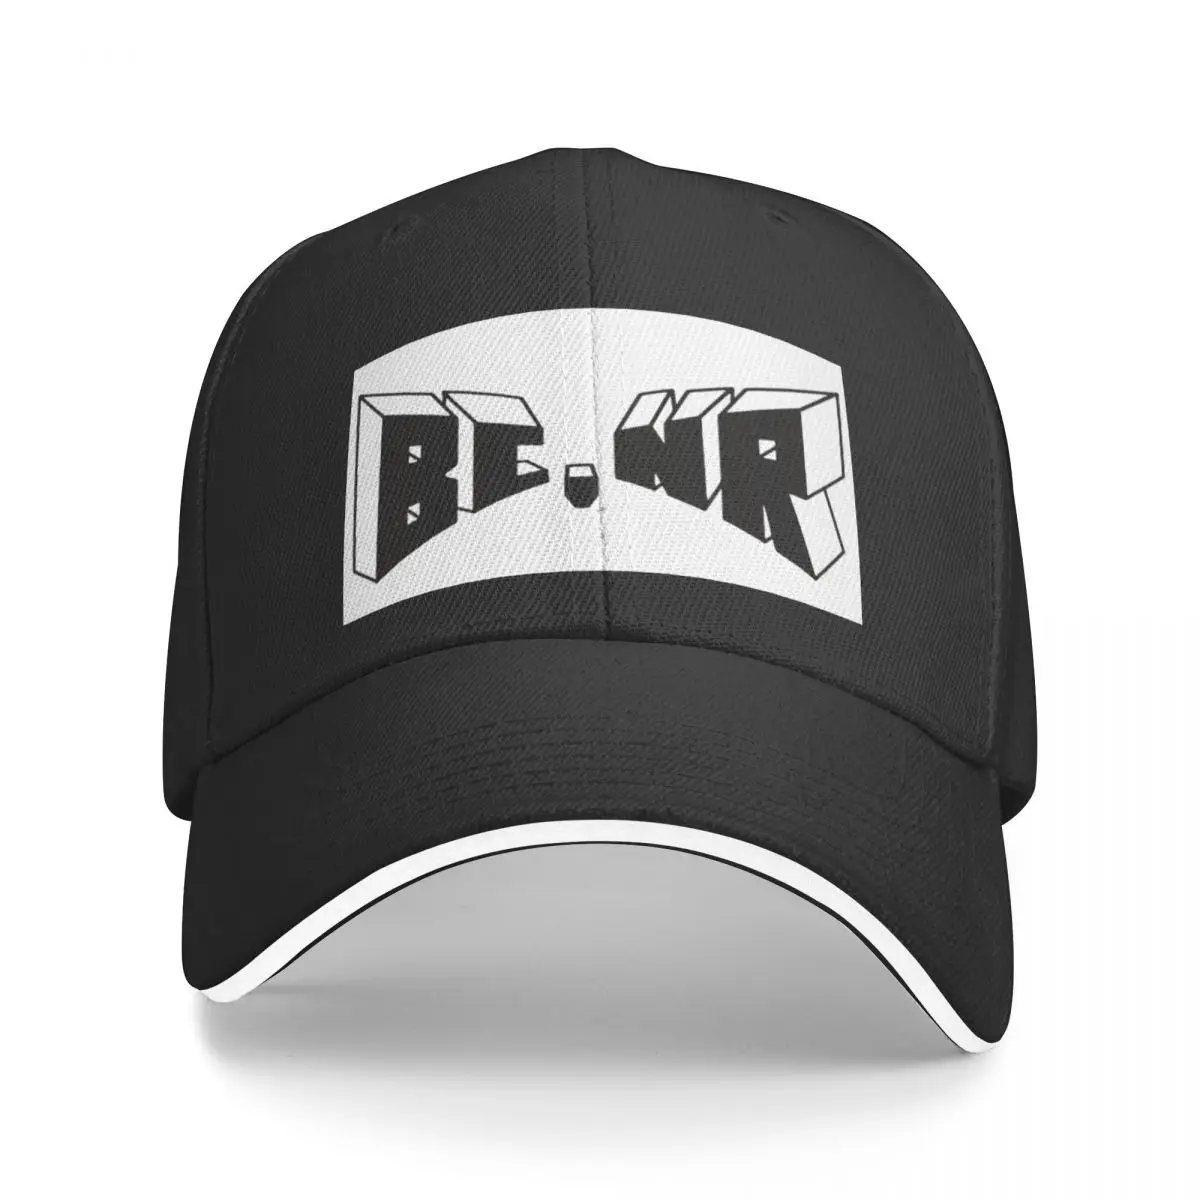 

New Black, Country New Road - Ants From Up There Baseball Cap Snap Back Hat Ball Cap Hood Hats For Men Women's